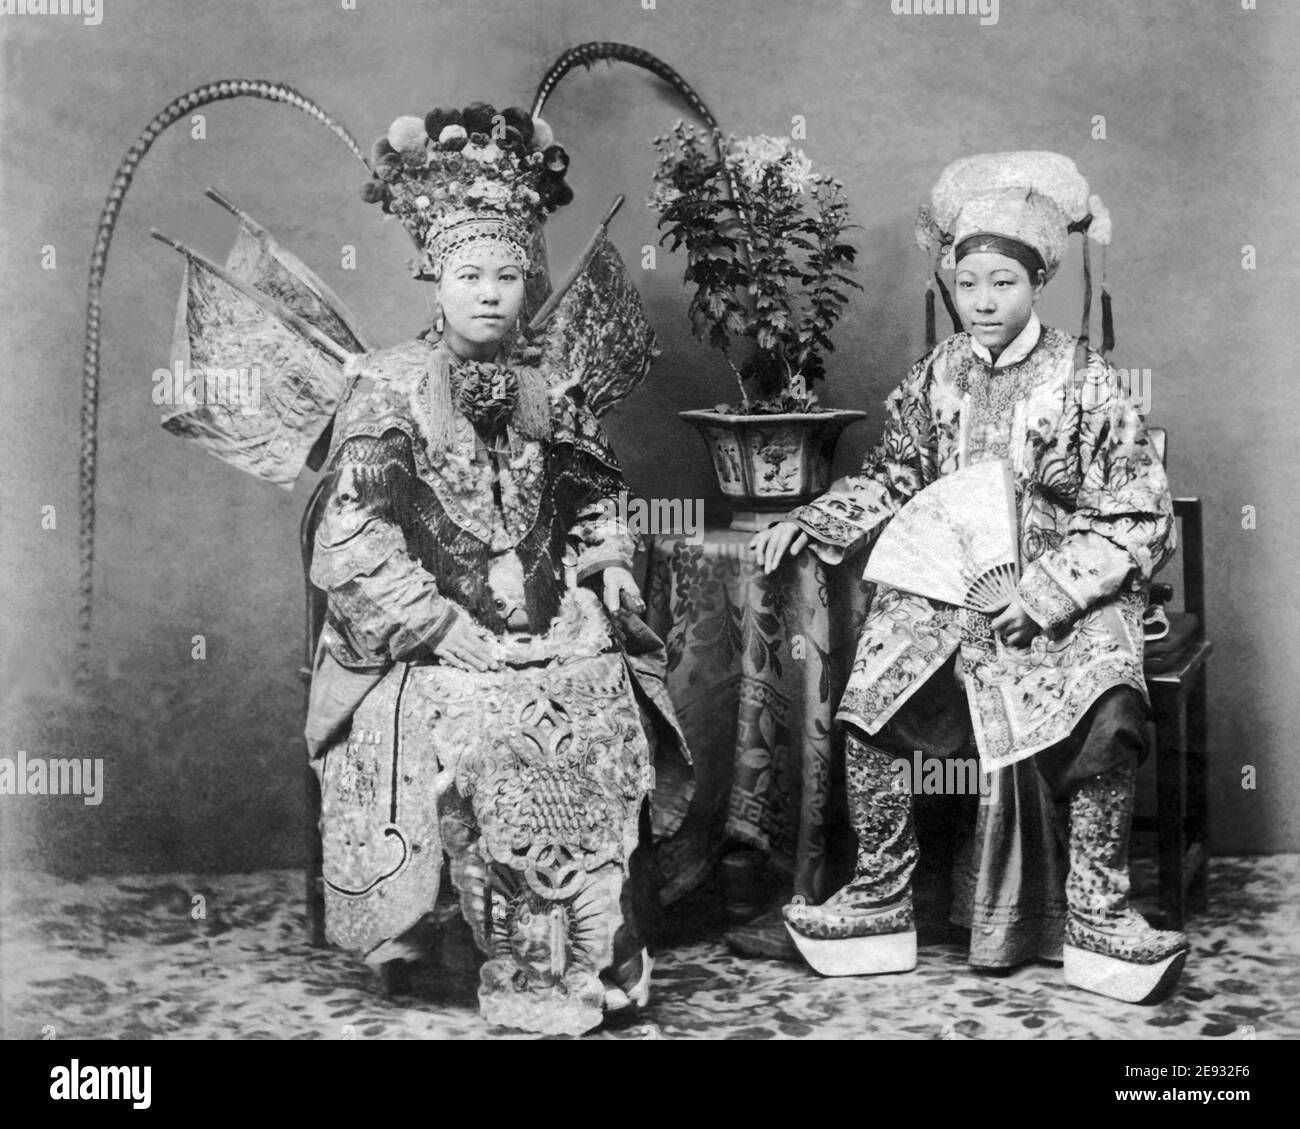 Late 19th century photograph - Chinese actors in costume, China. Stock Photo